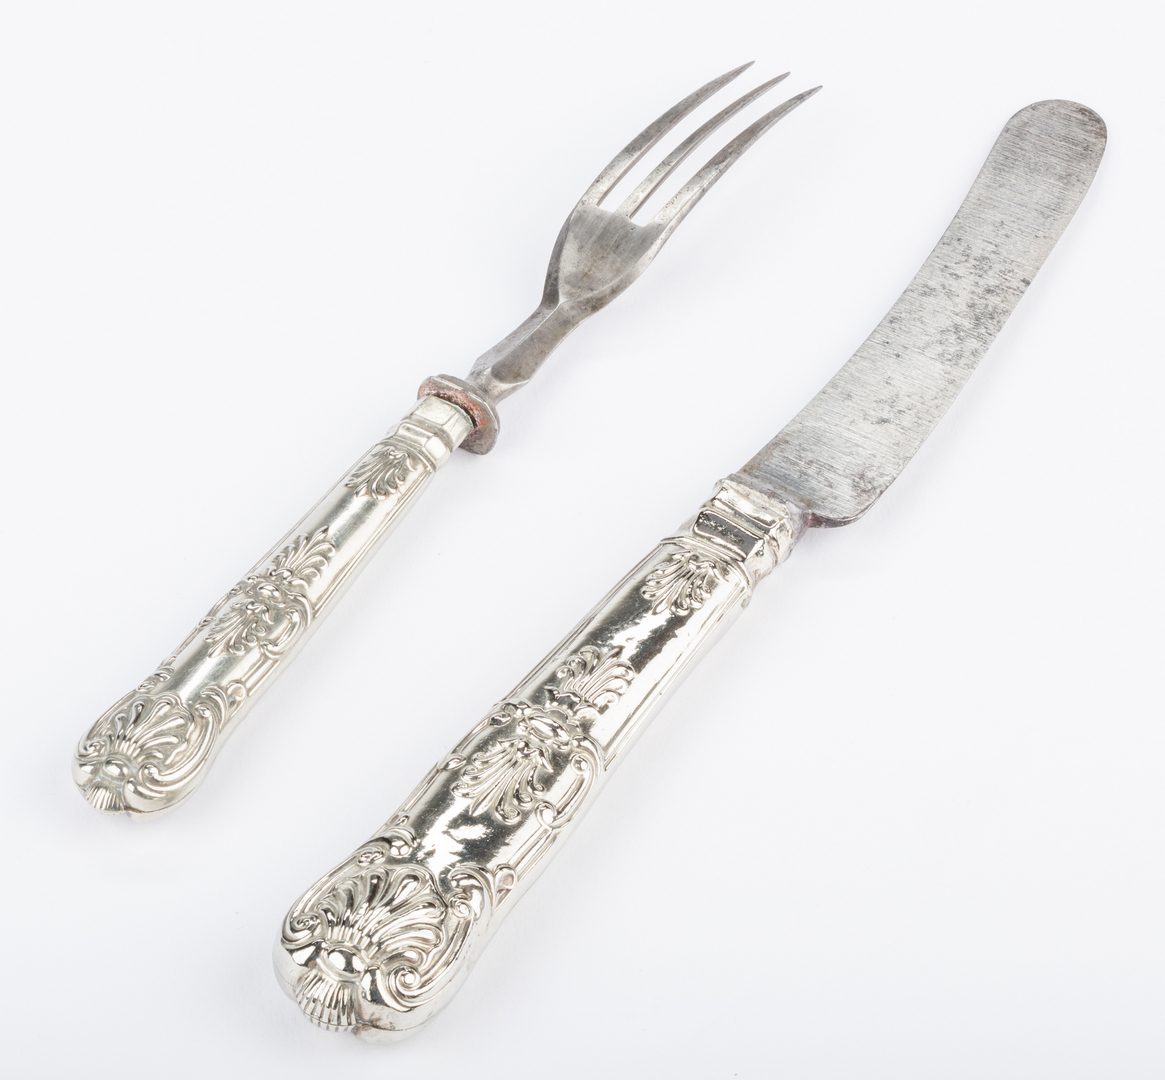 Lot 87: Knife and Fork, possibly Andrew Jackson's, 2 items